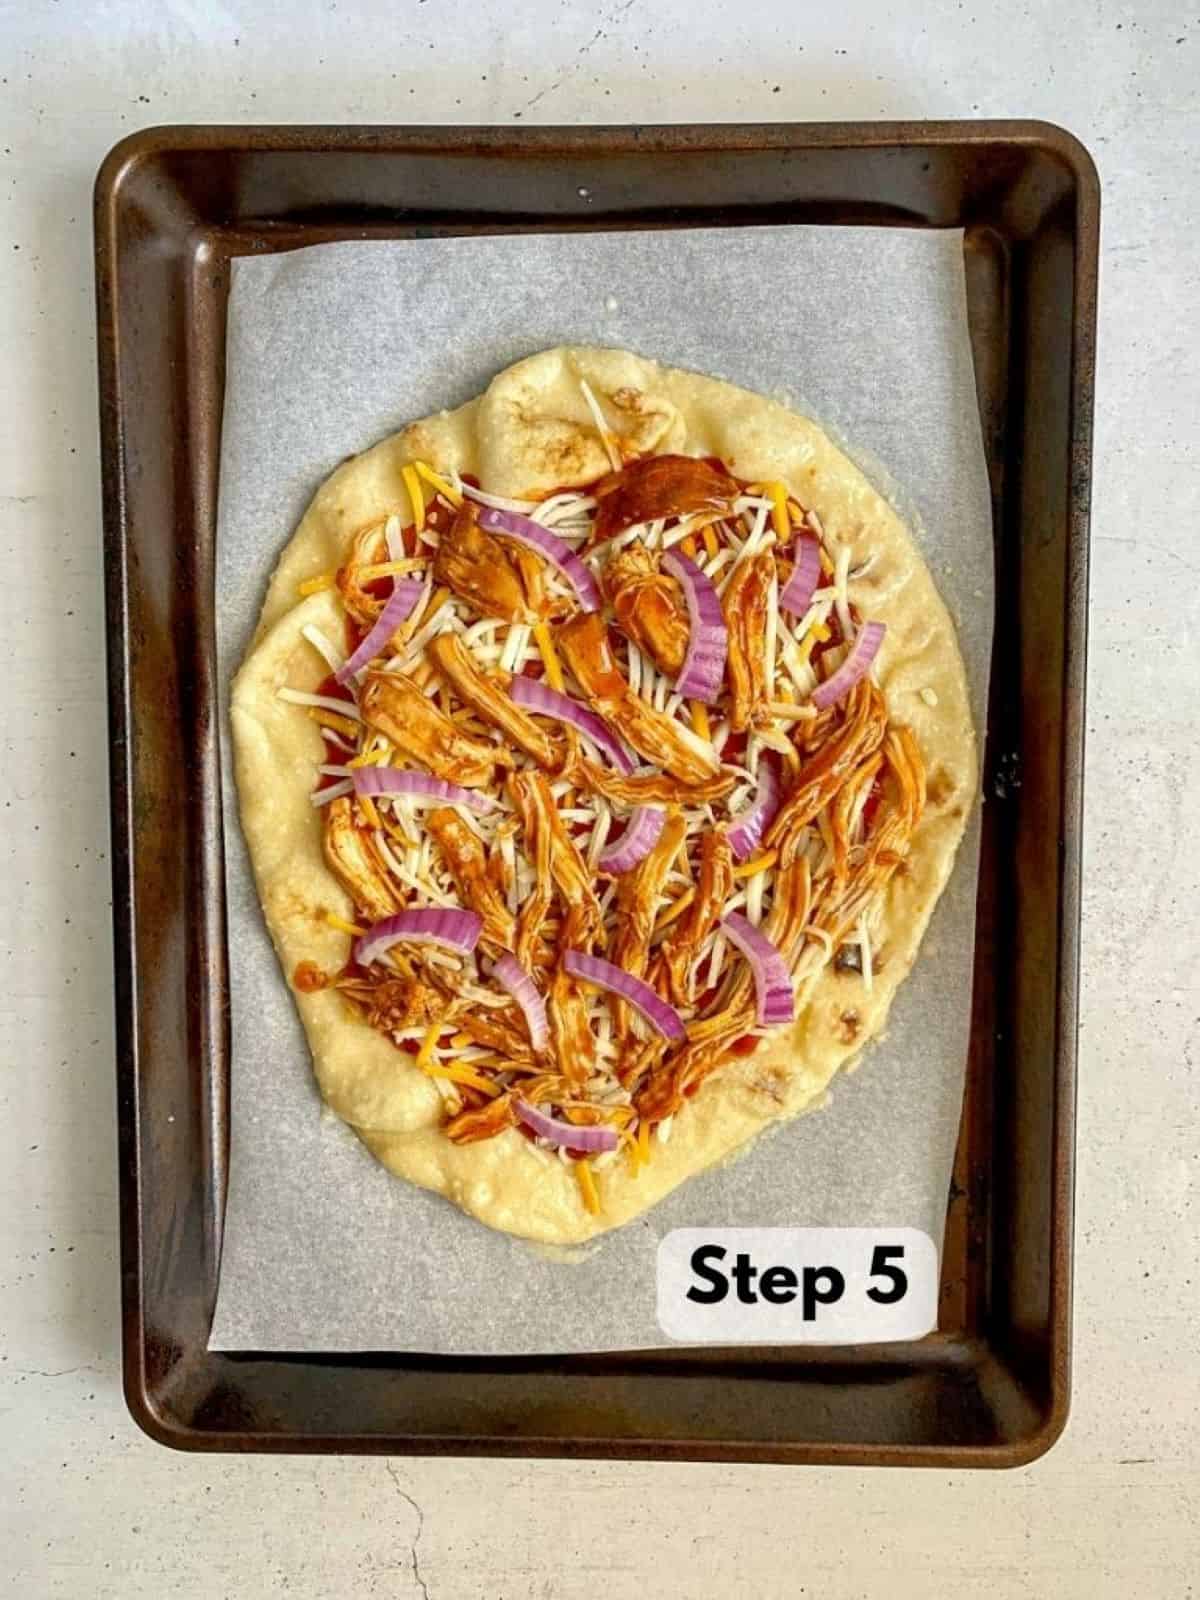 Step five. BBQ sauce, cheese, shredded chicken, and red onions on naan pizza crust that is on a baking sheet with parchment paper.